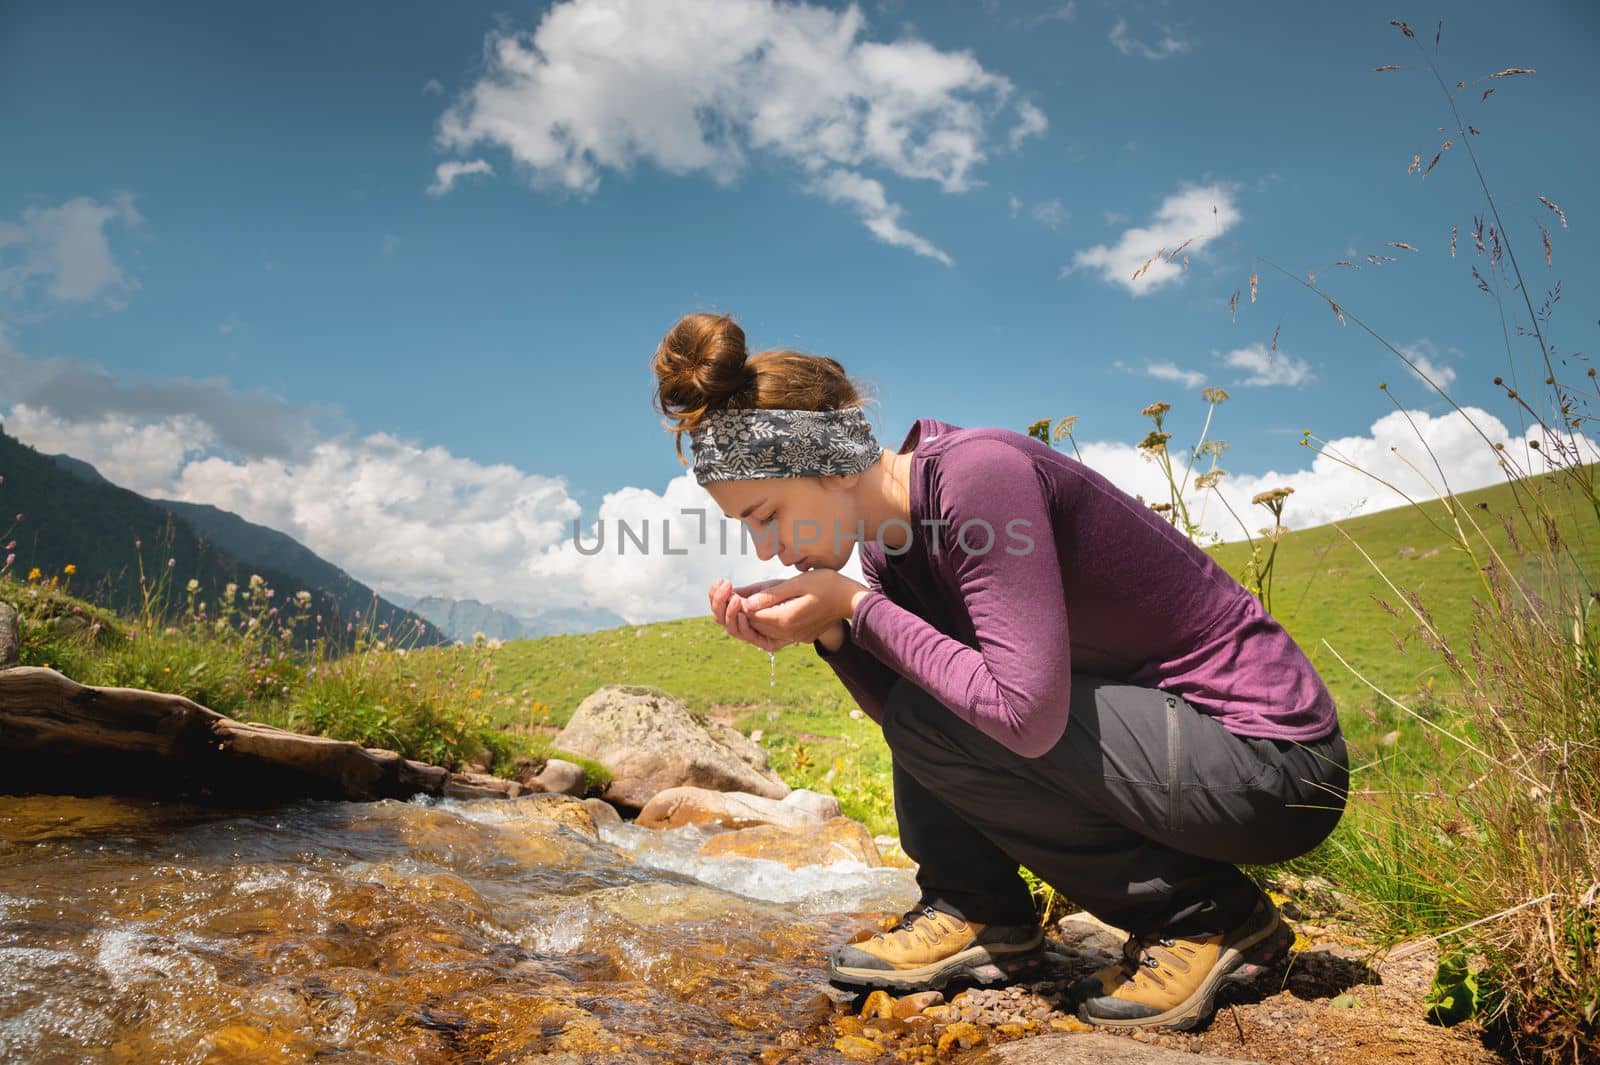 woman tourist takes water in the river after a walk. Happy girl smiling while enjoying summer holidays outdoors in the mountains by yanik88